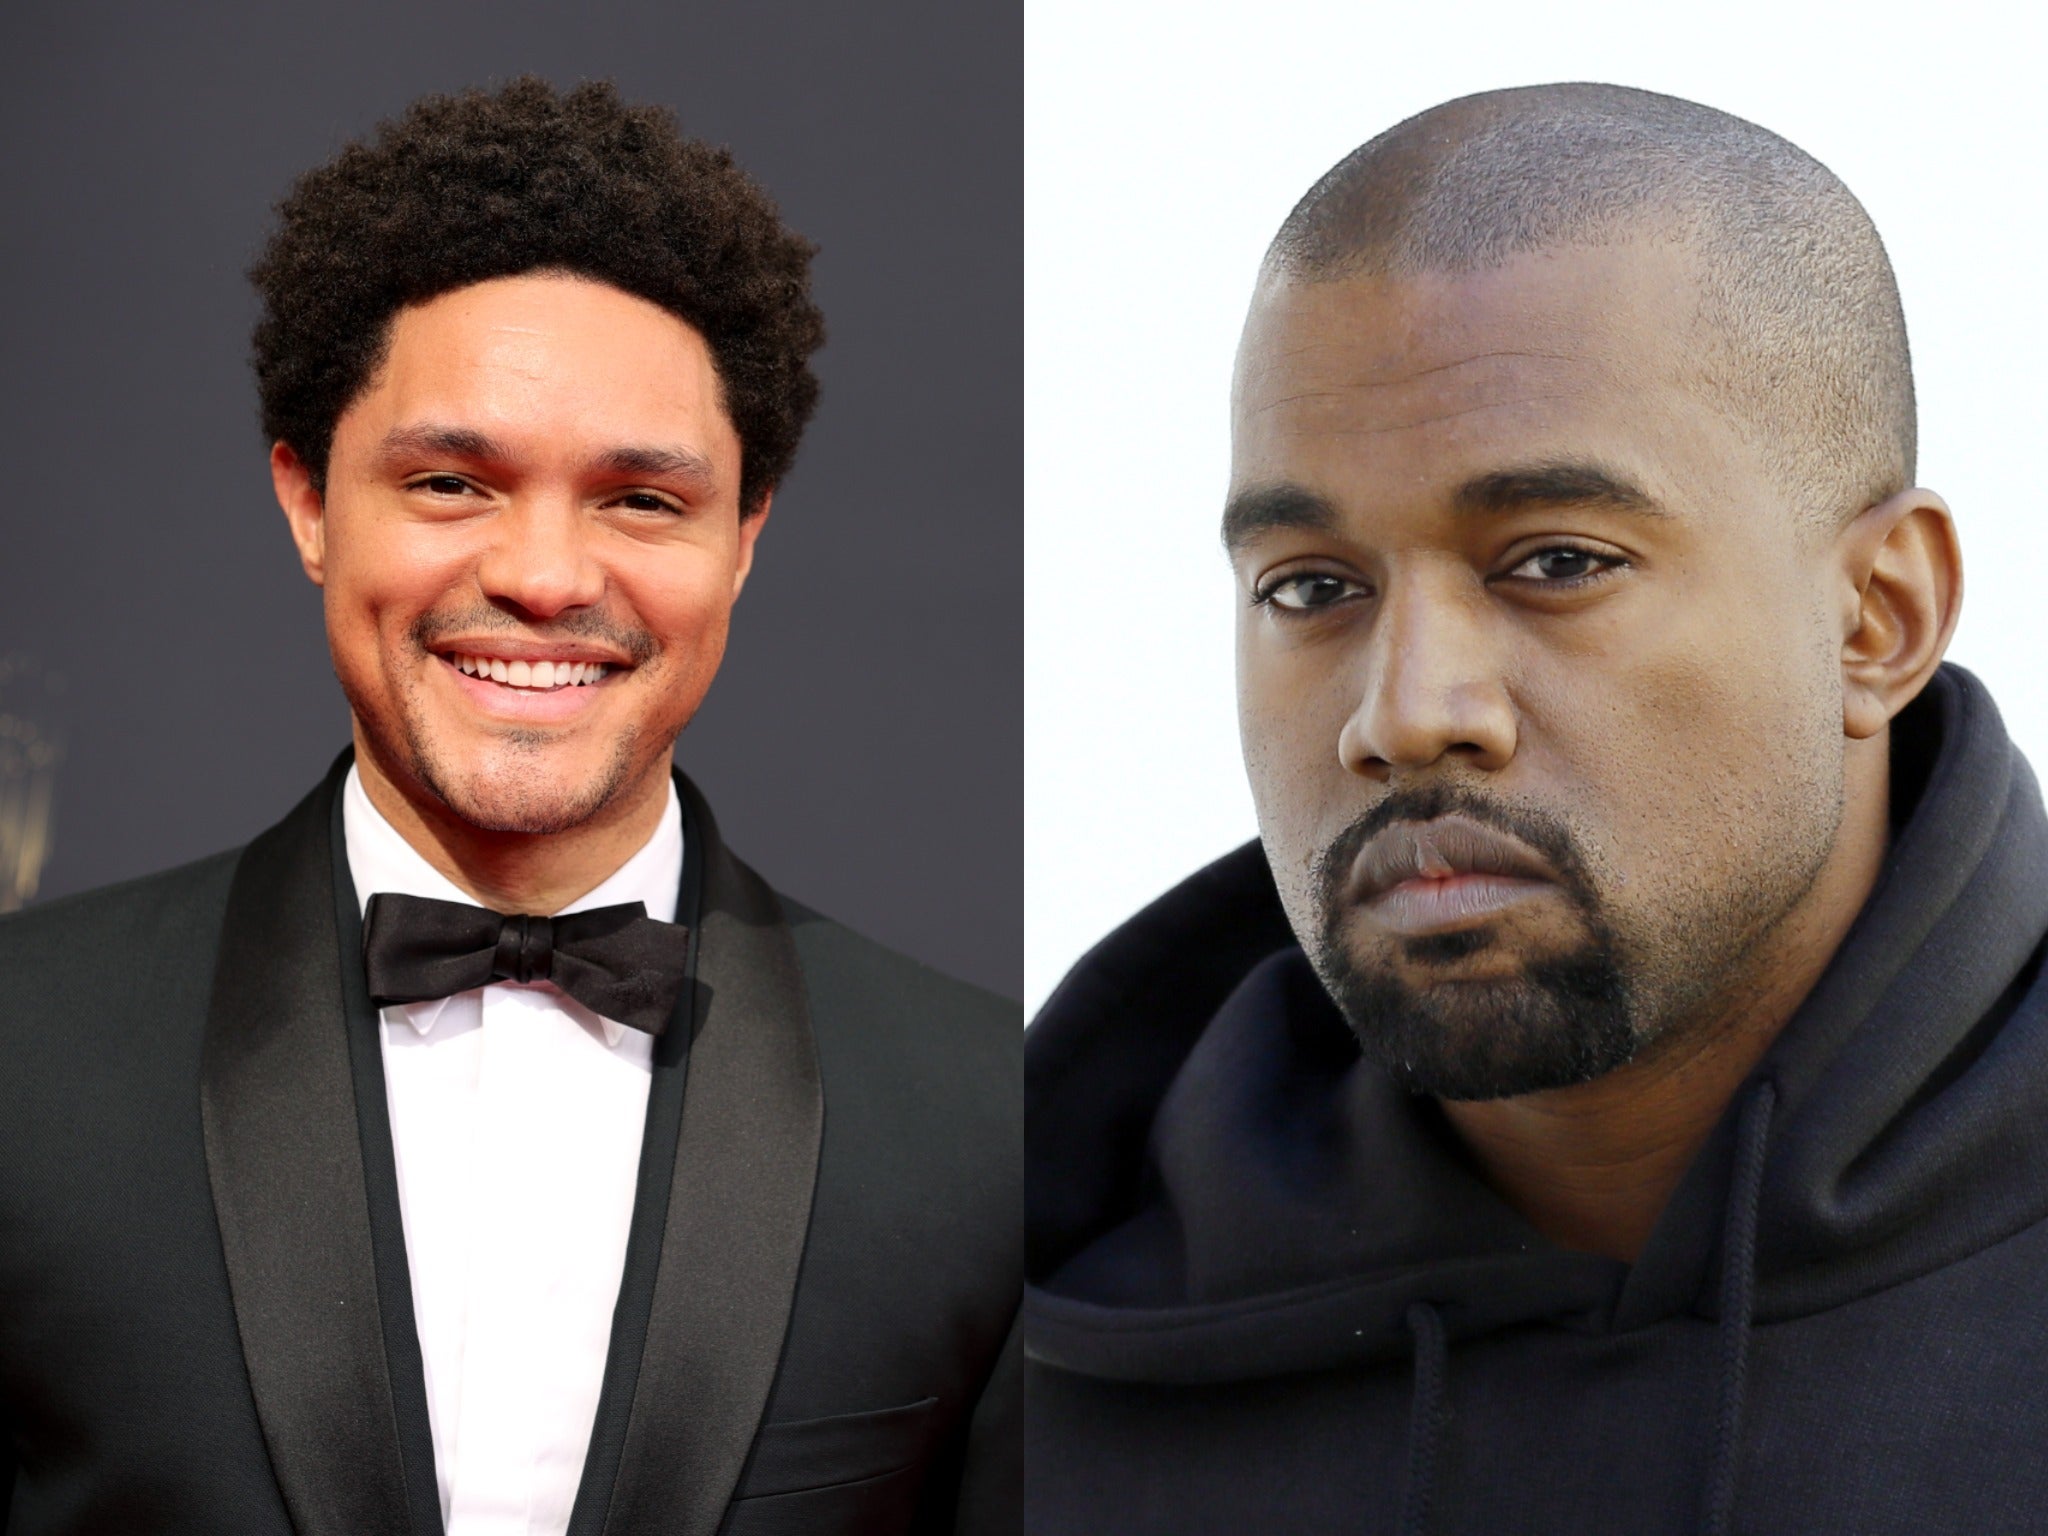 Kanye West’s Instagram account was suspended after he used a racial slur against ‘Daily Show’ host Trevor Noah